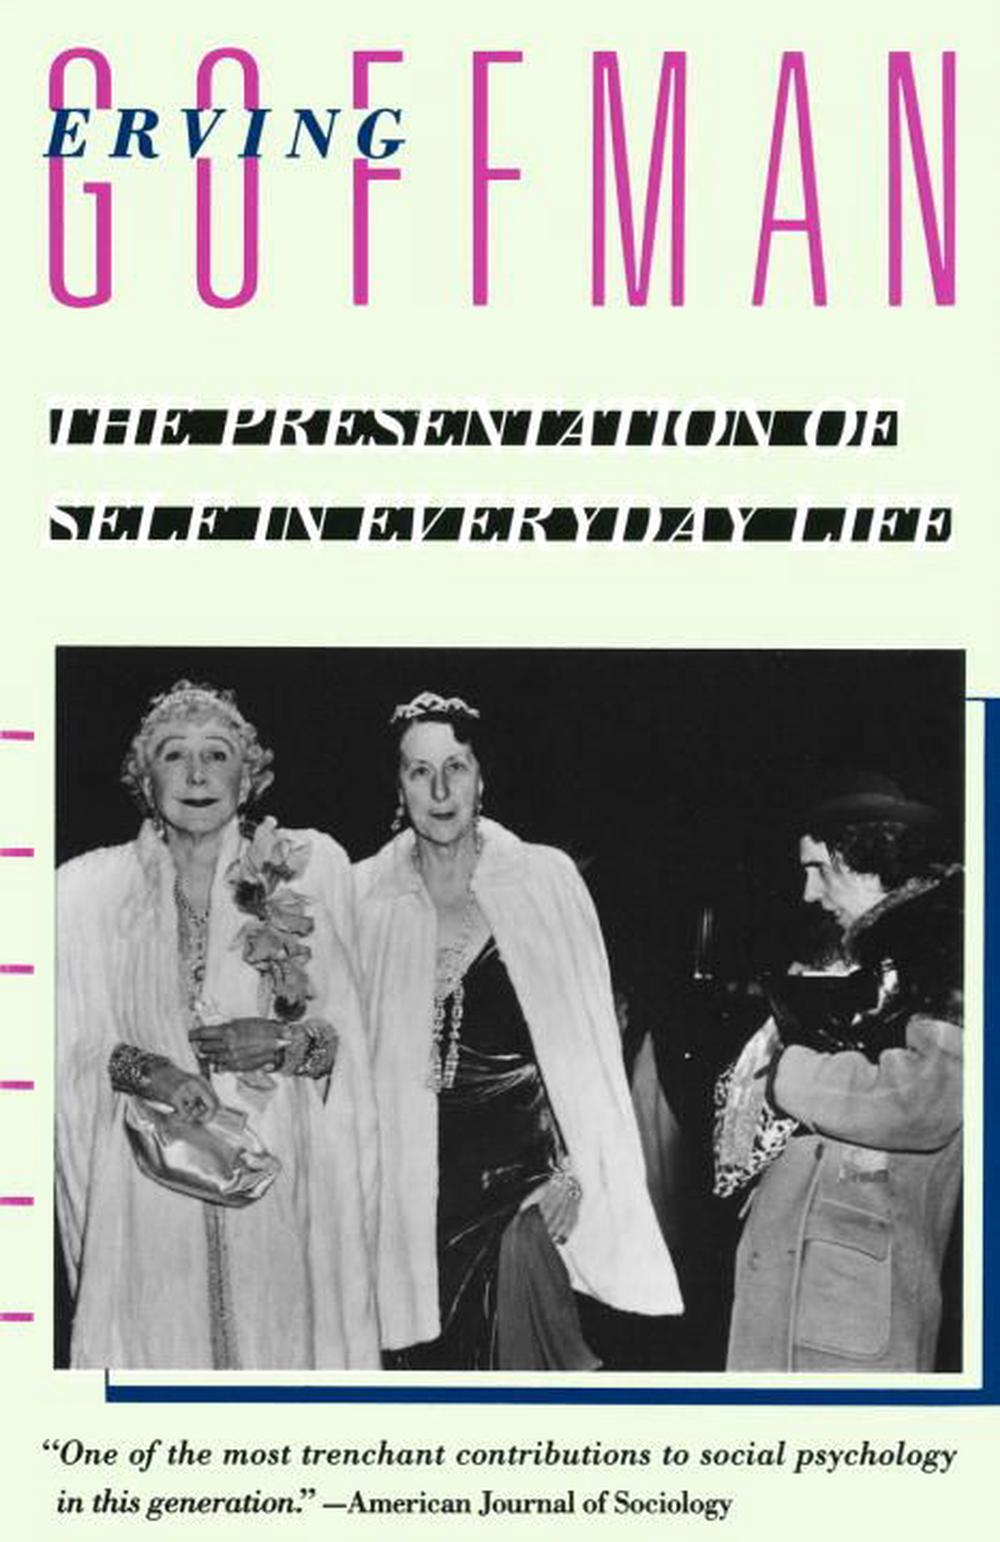 the presentation of self in everyday life erving goffman